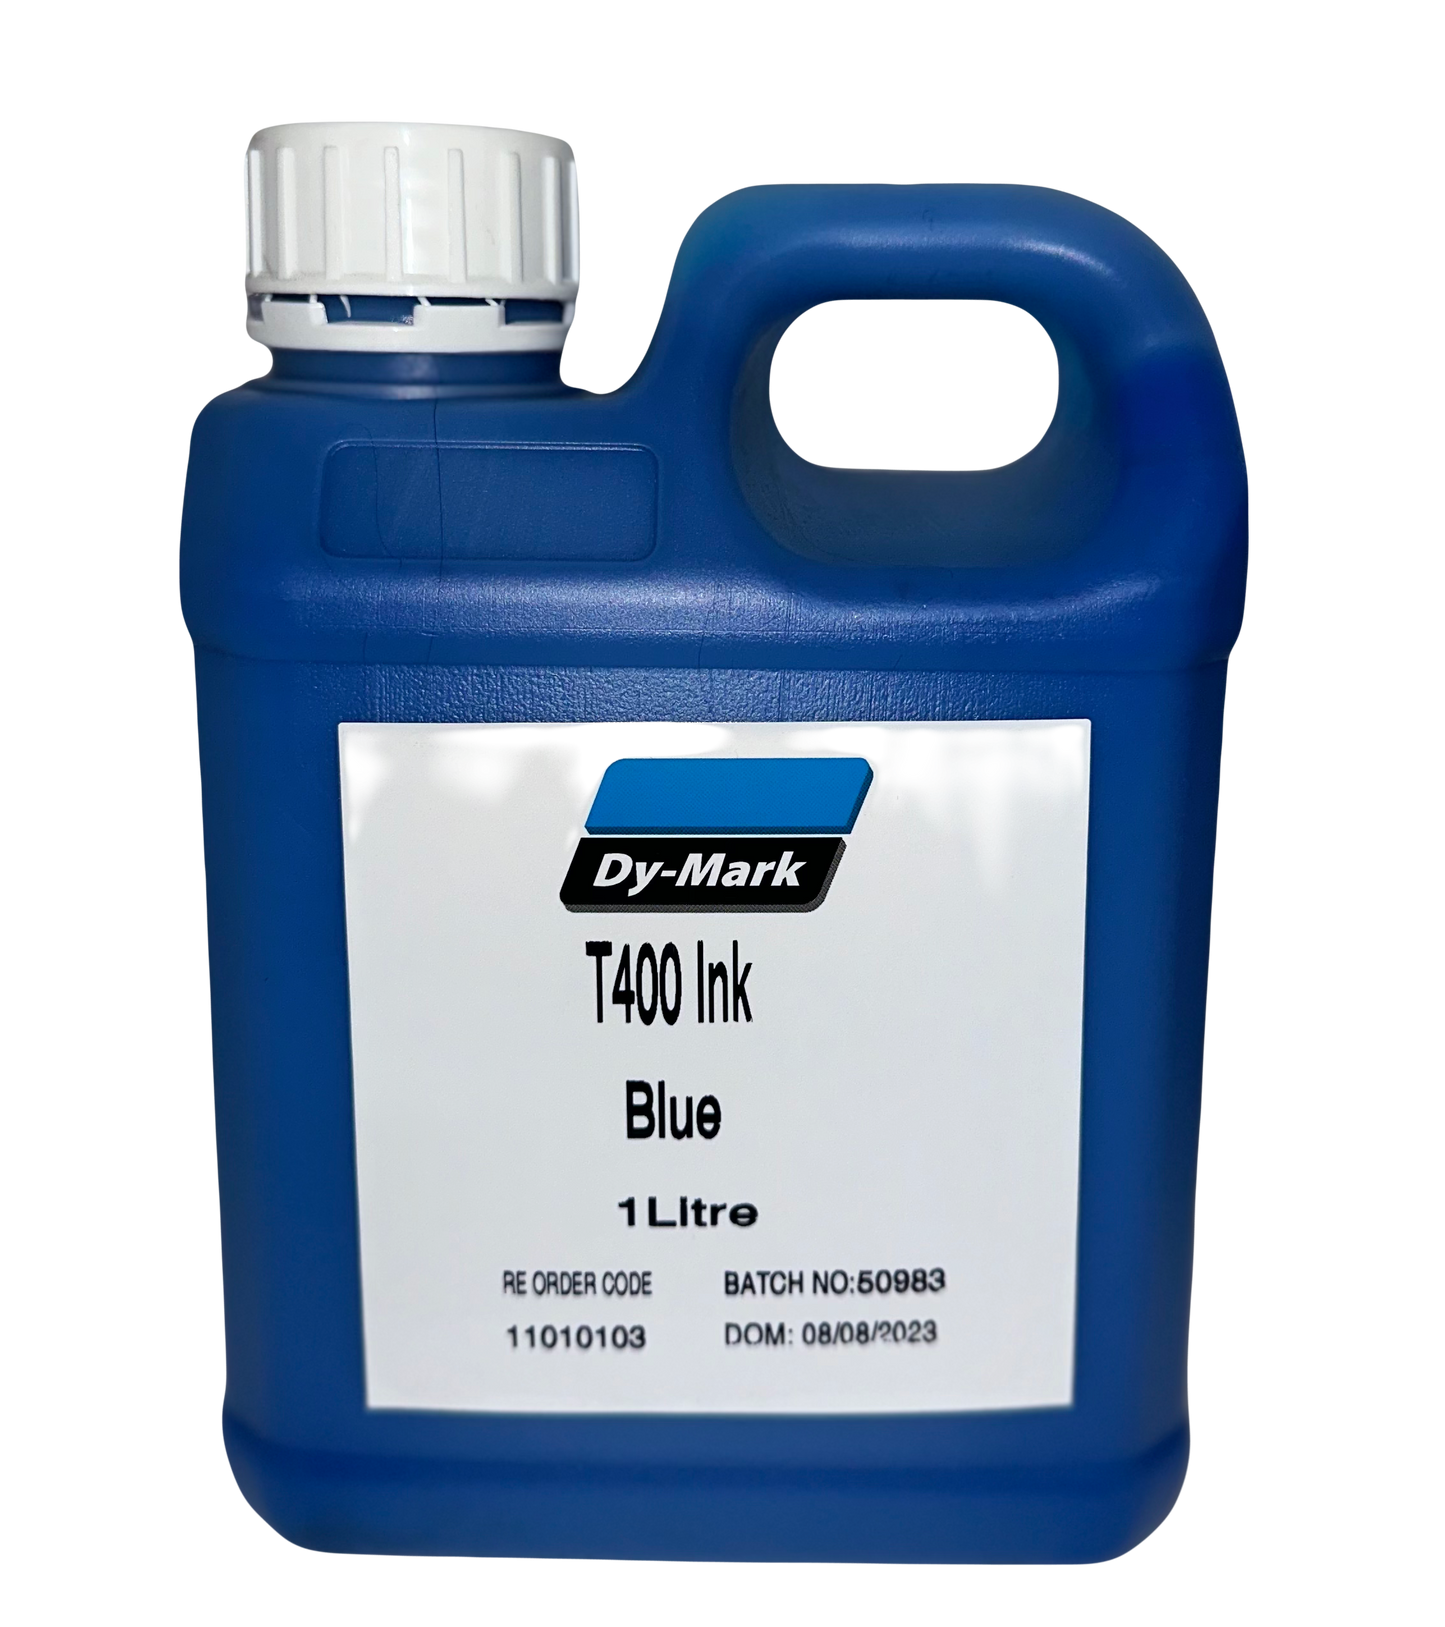 Dy-Mark T400 Ink Blue